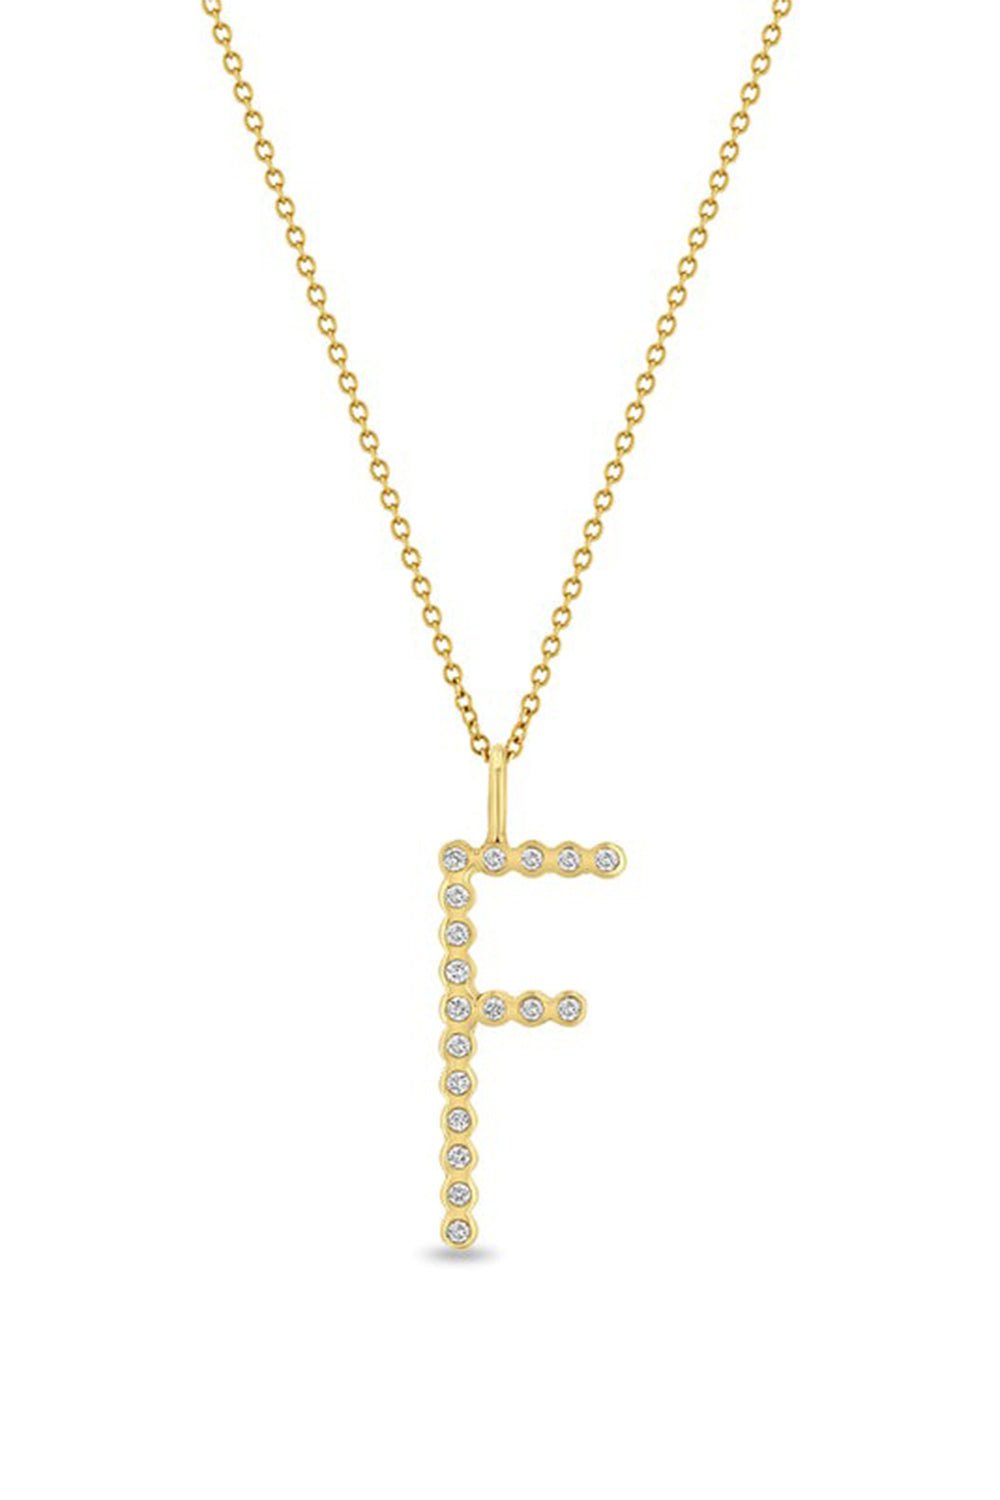 ZOE CHICCO-Small Letter Bezel Necklace-YELLOW GOLD